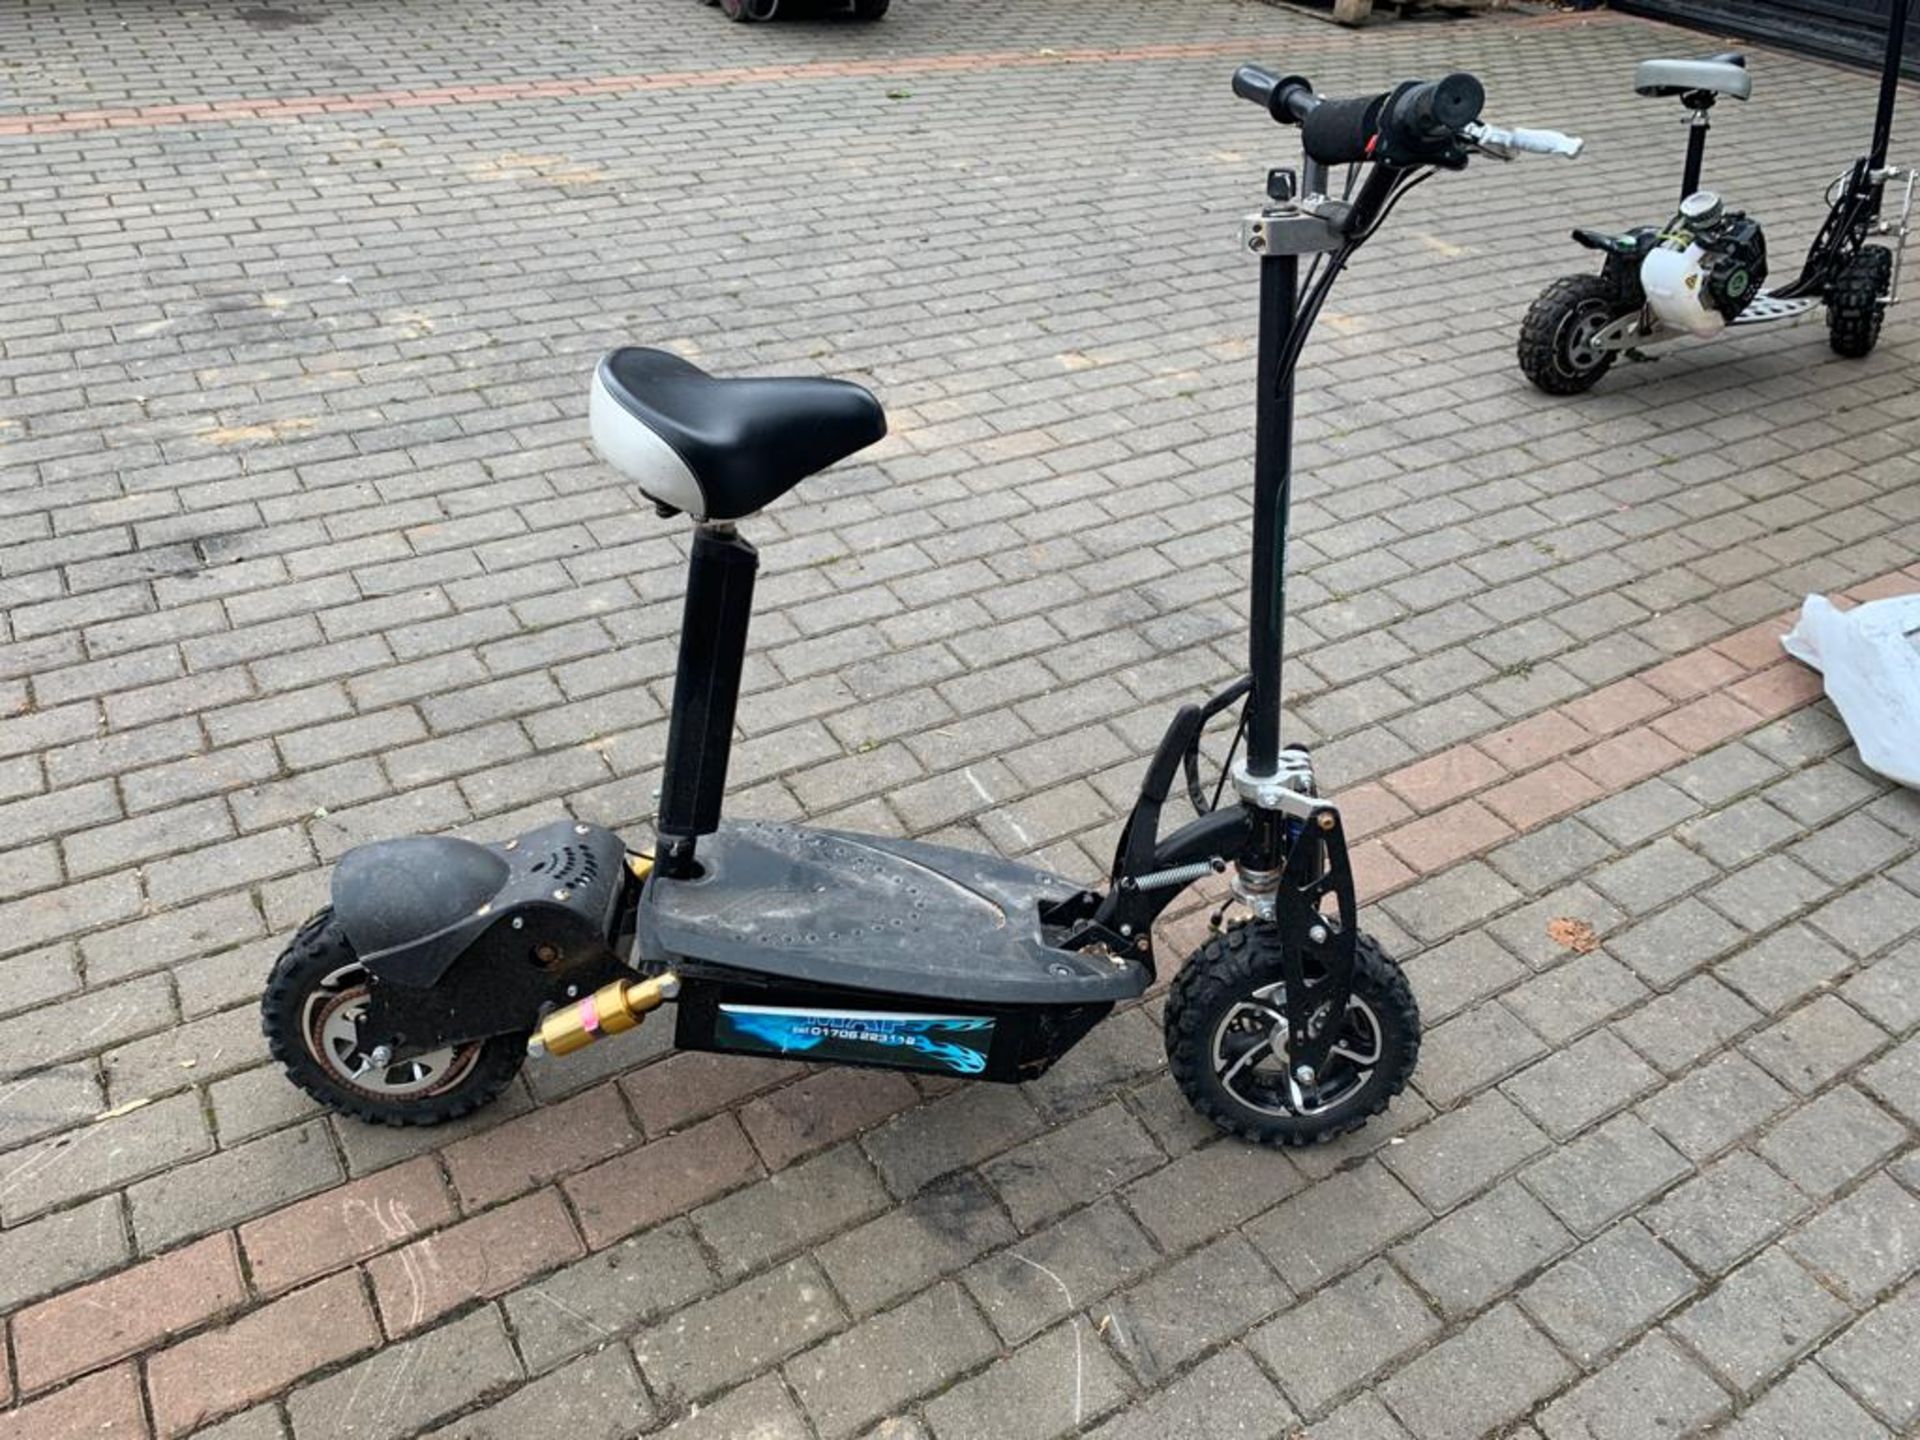 2000W ELECTRIC POWERED RIDE ON SCOOTER, YEAR 2018, IN GOOD ORDER, C/W CHARGER *PLUS VAT*